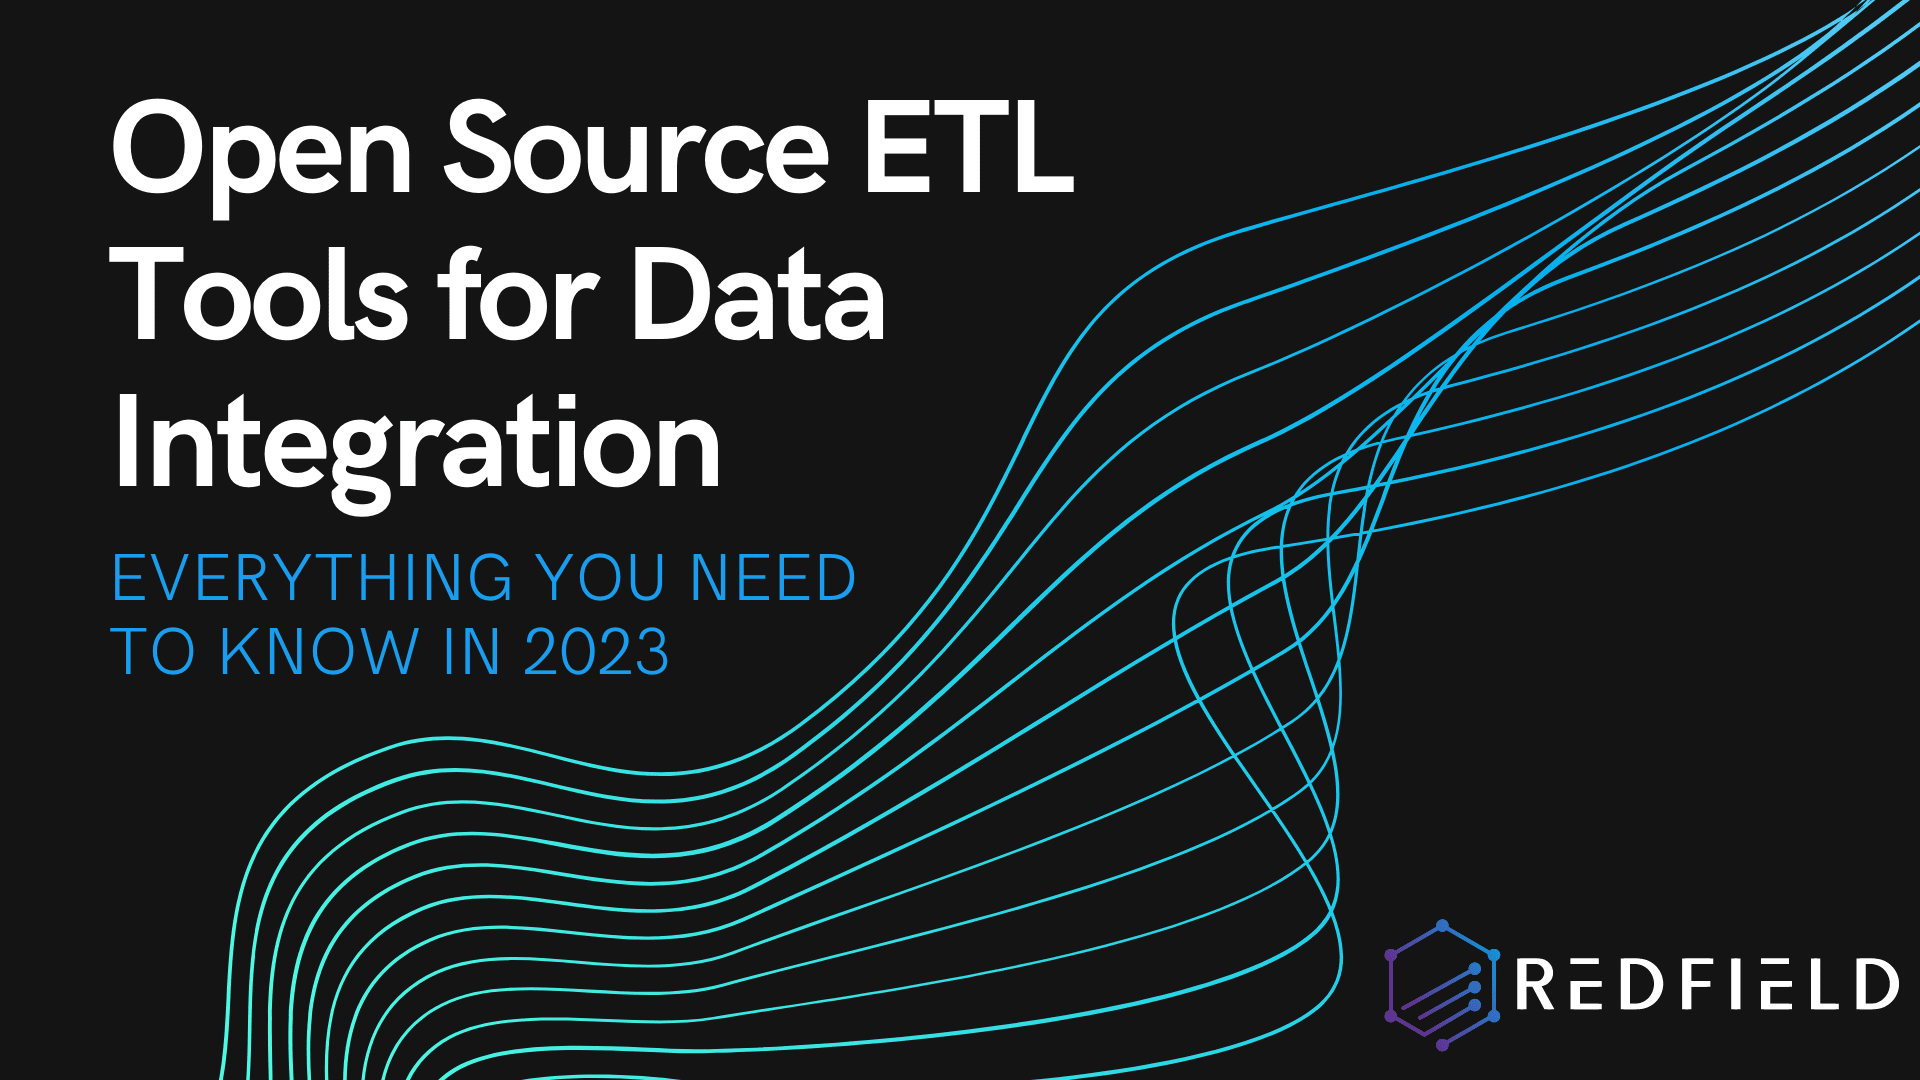 Open Source ETL Tools for Data Integration: Everything You Need to Know in 2023